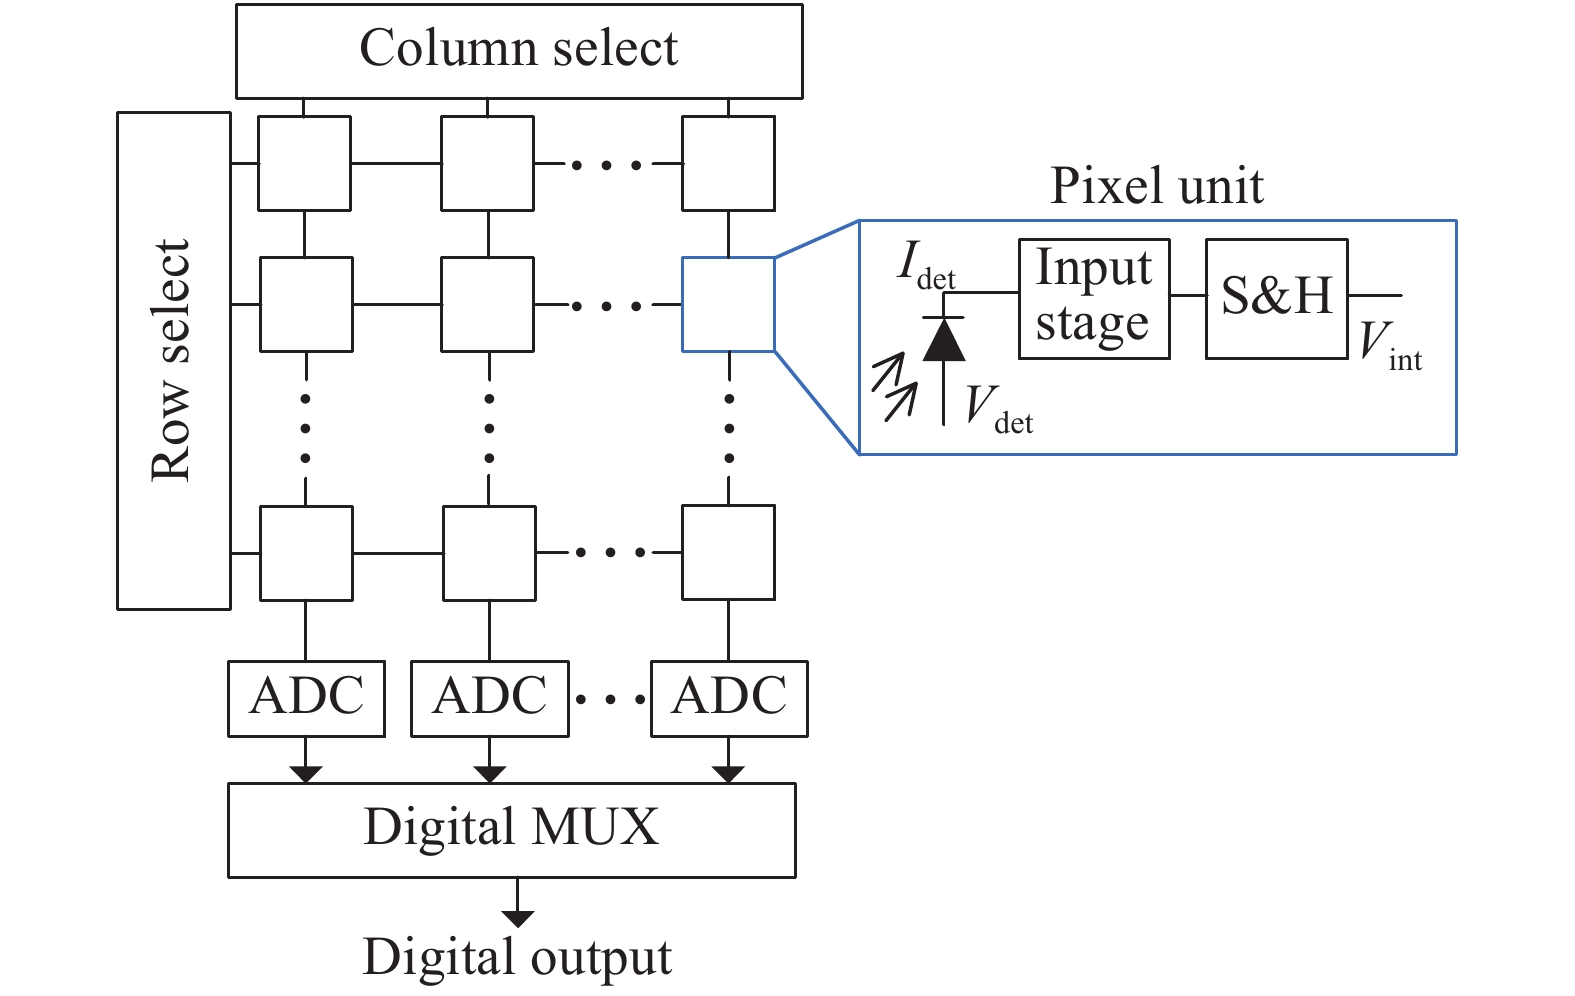 Architecture of digital readout circuits with column-level ADC